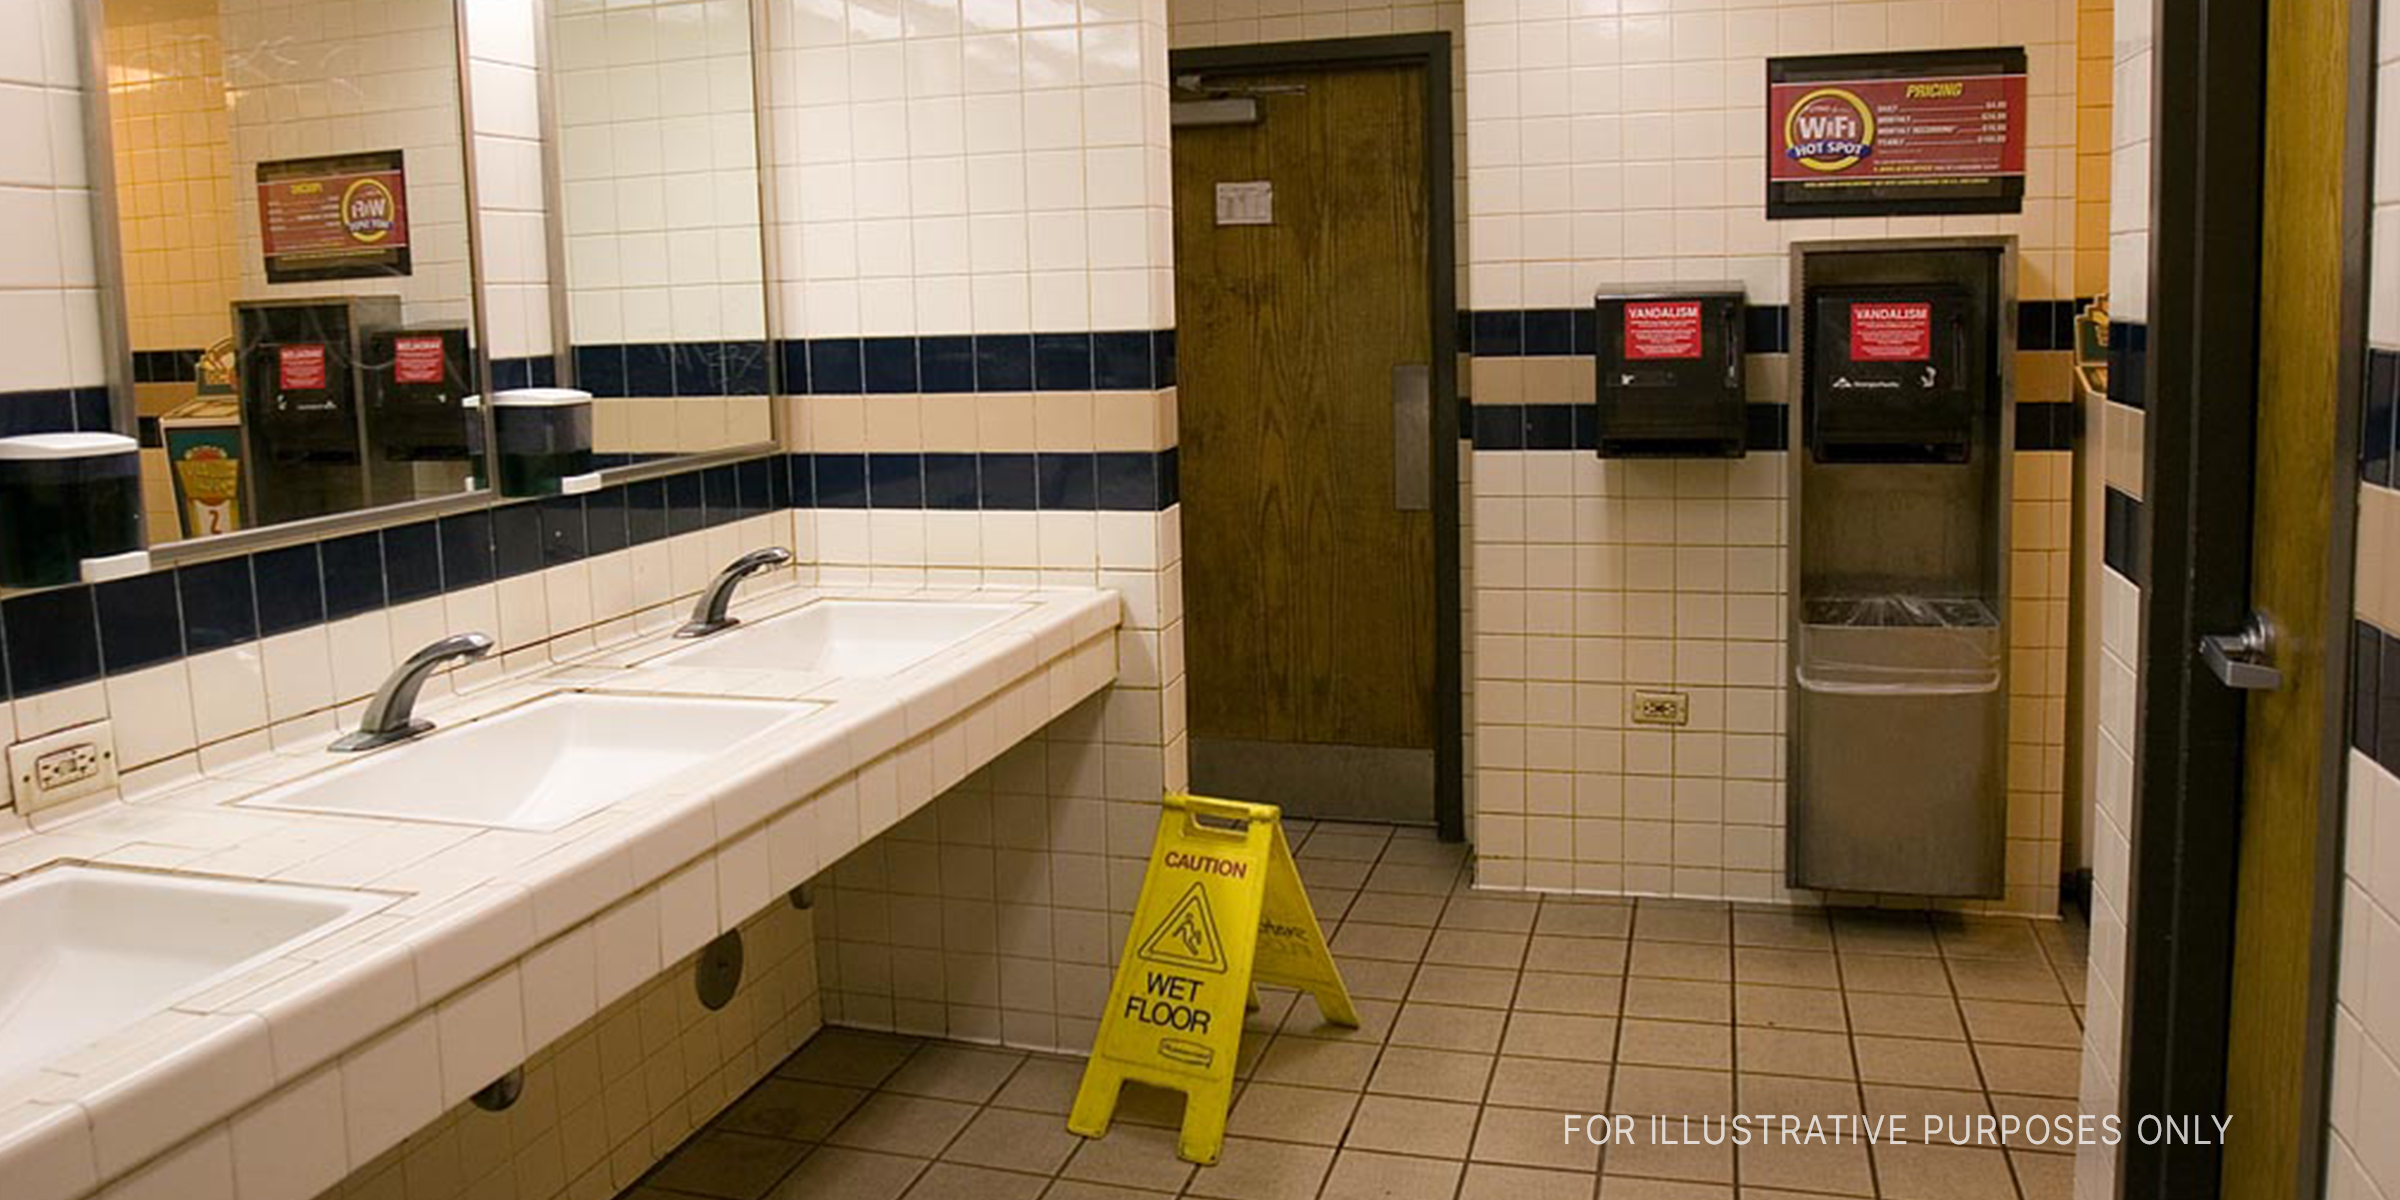 Public bathroom. | Source: Flickr / pointnshoot (CC BY 2.0)